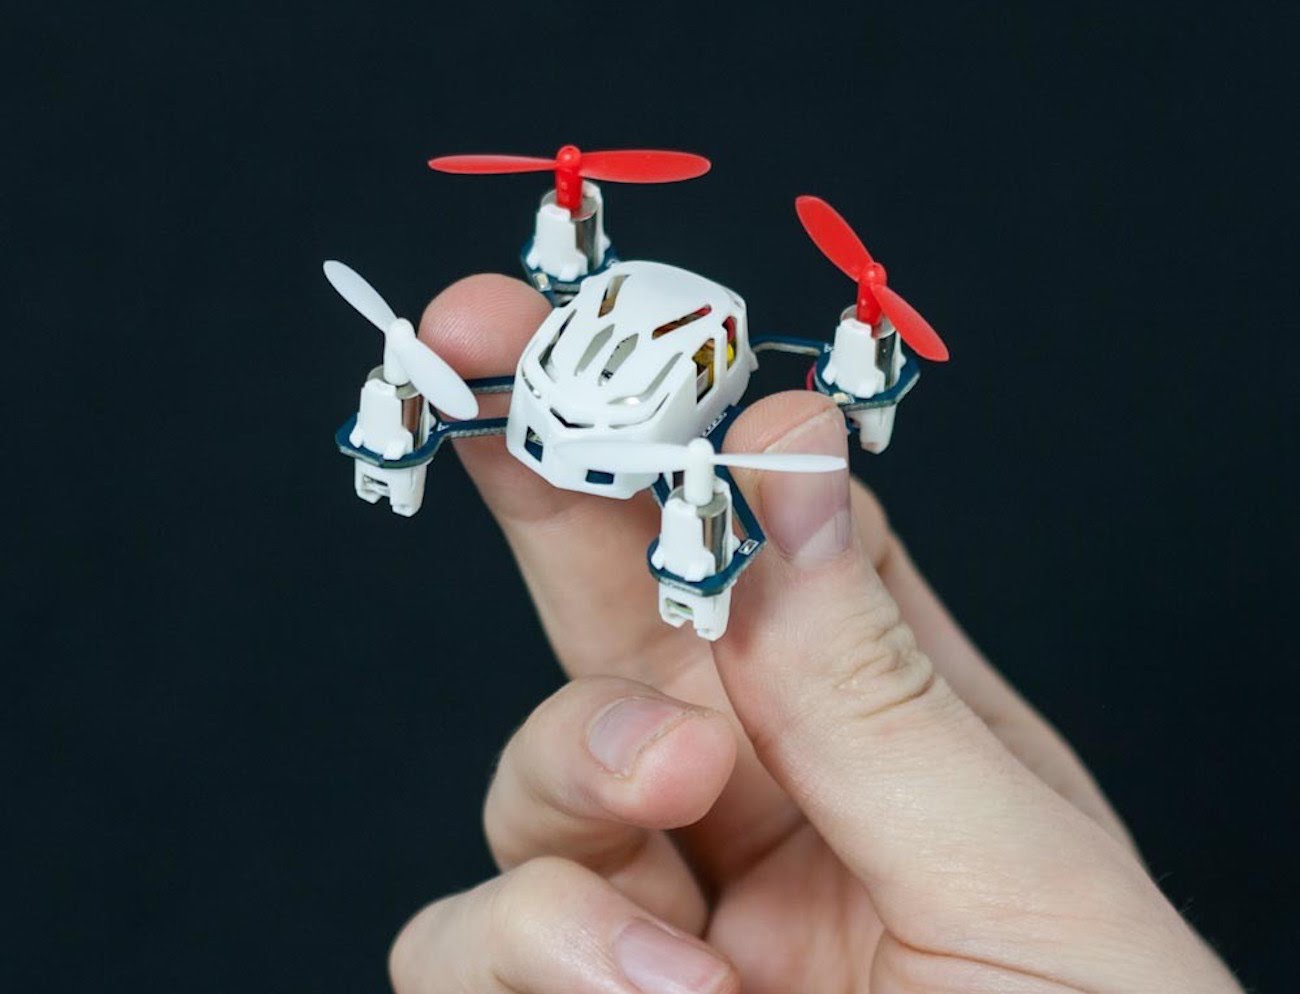 5 Smallest DRONES You Need to See (Coolest quadcopters) 2016